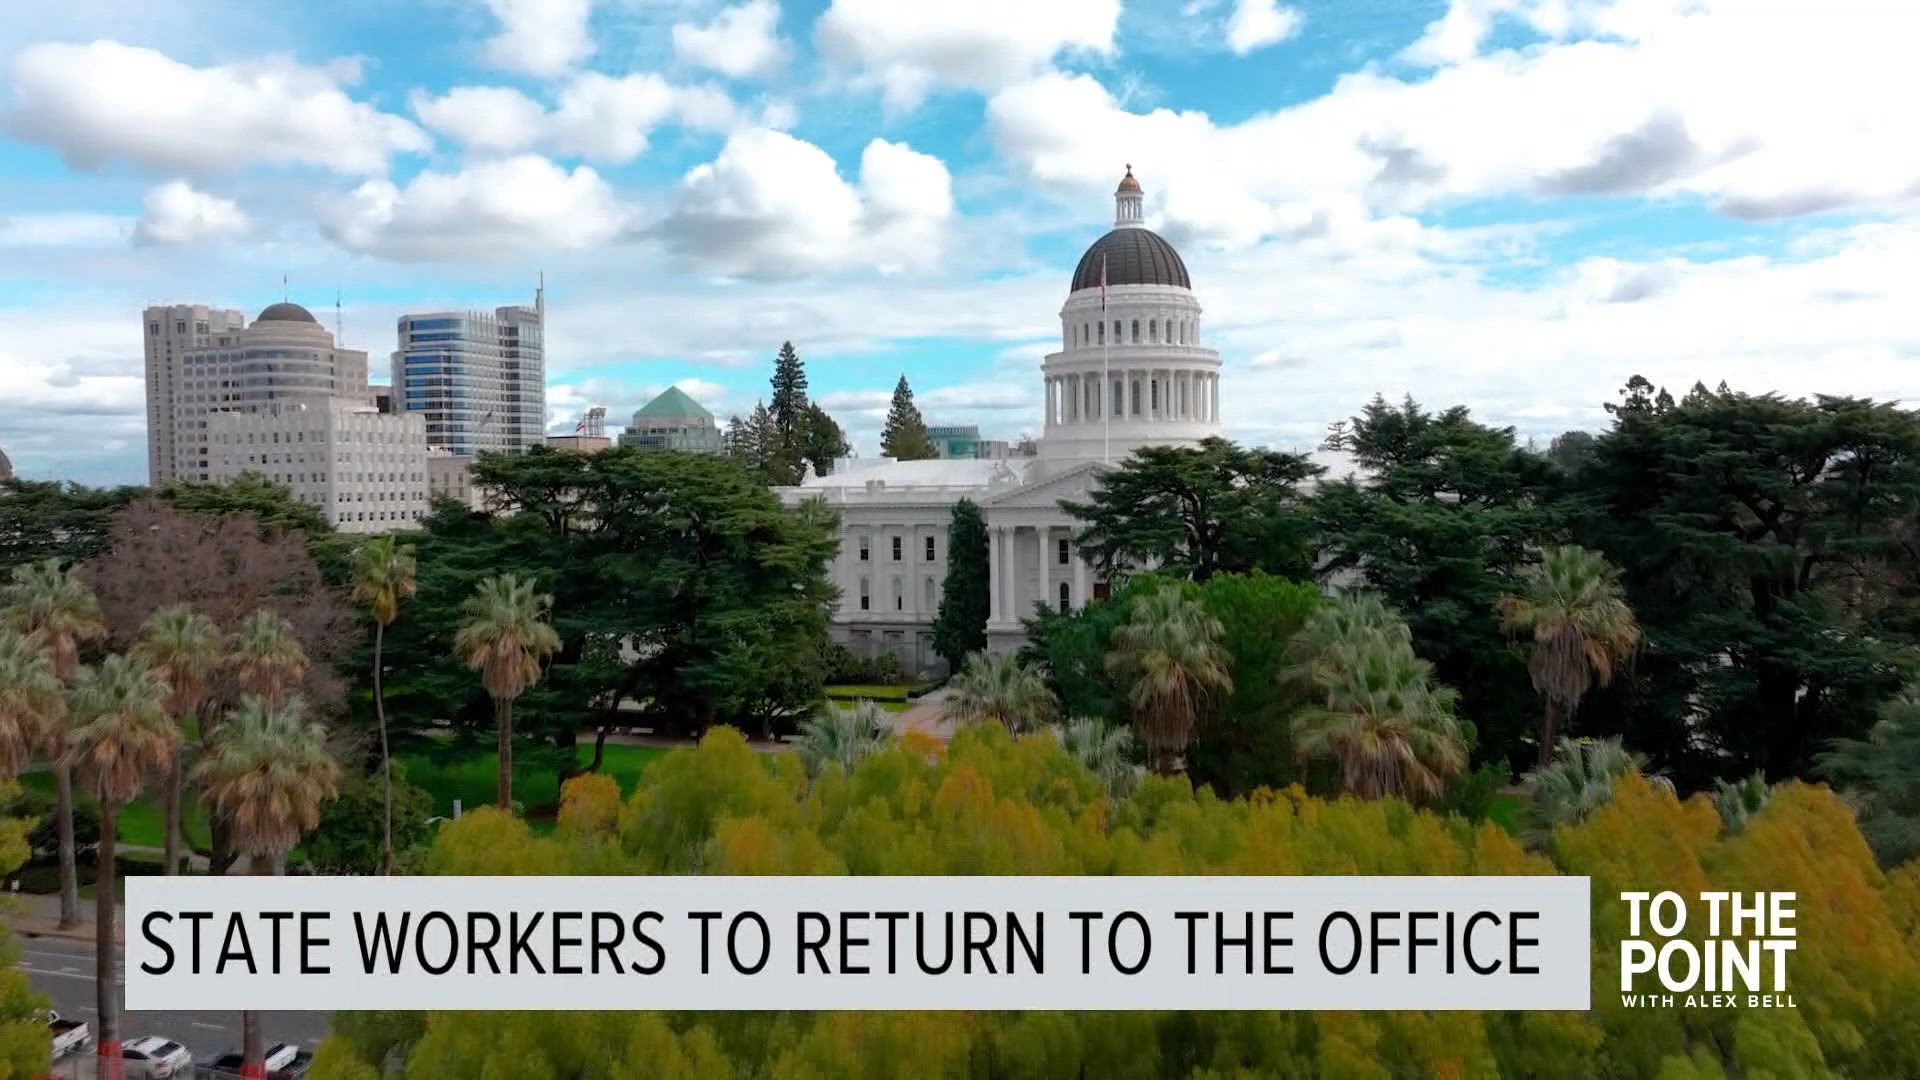 Governor Gavin Newsom issued a return to office mandate, requiring state employees to work at least two days a week in the office.